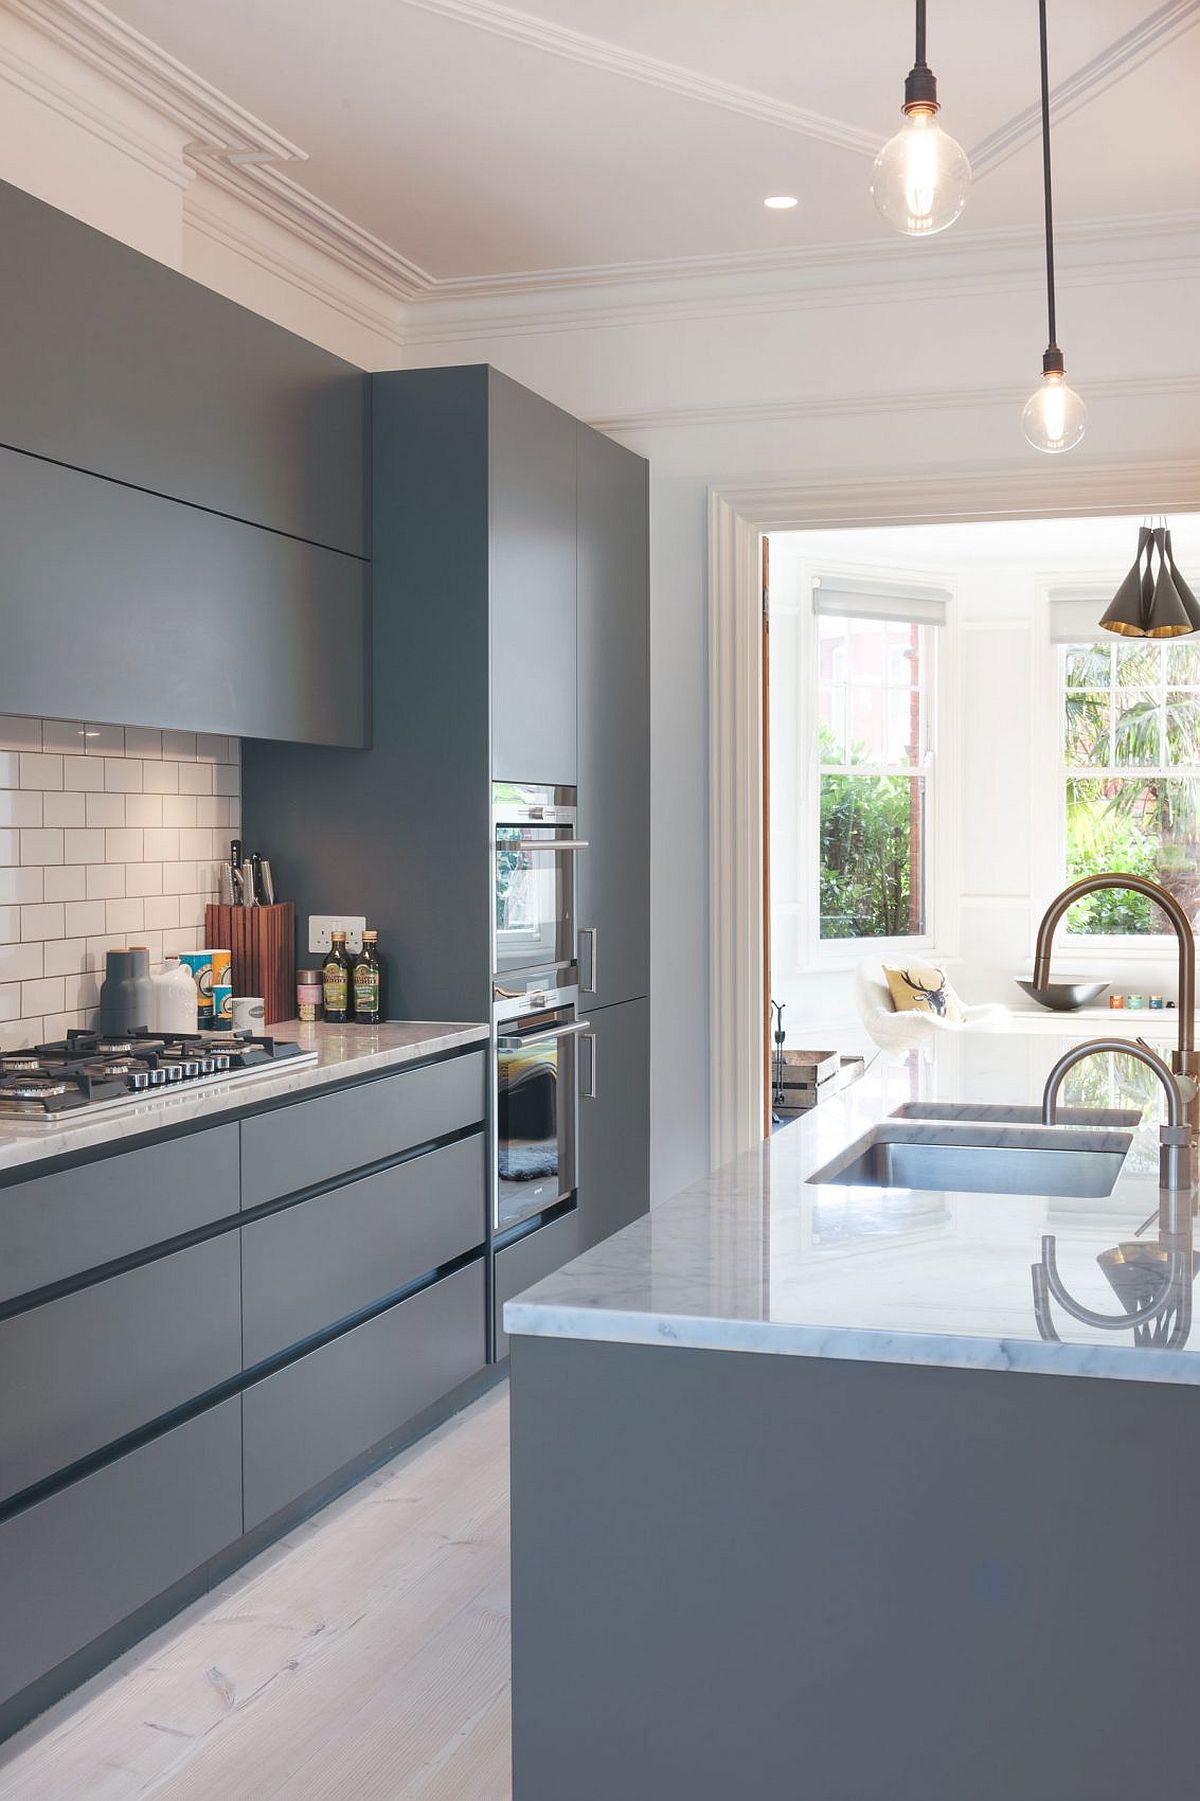 Stylish modern kitchen in shades of bluish-gray and white is an absolute showstopper